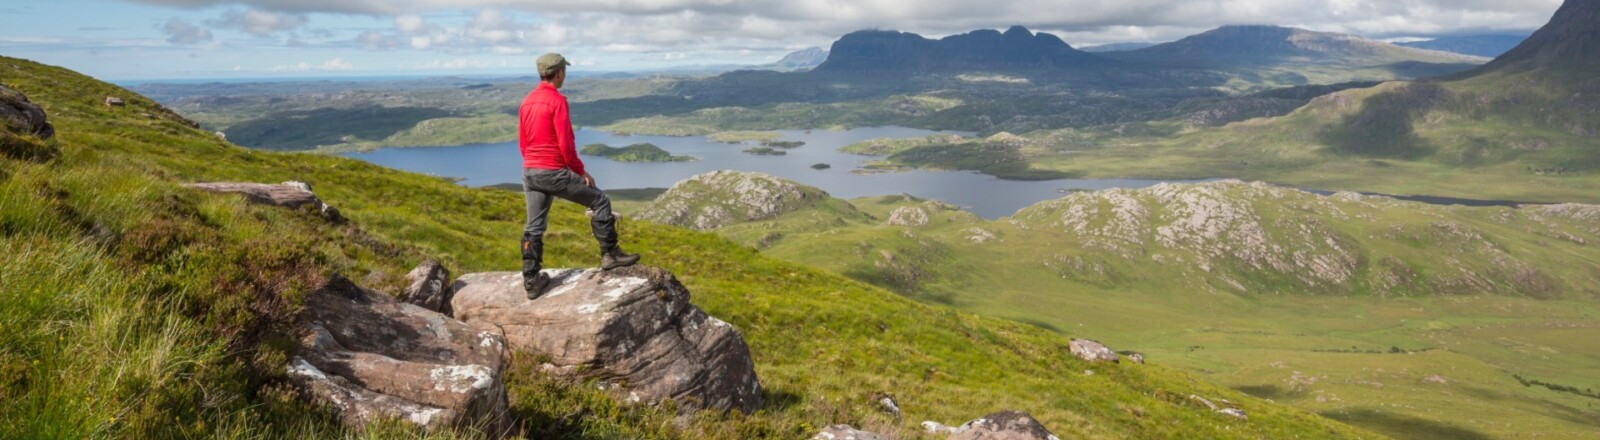 Hillwalker taking in the views over to Suilven from Stac Pollaidh, a mountain in the north-west Scottish Highlands